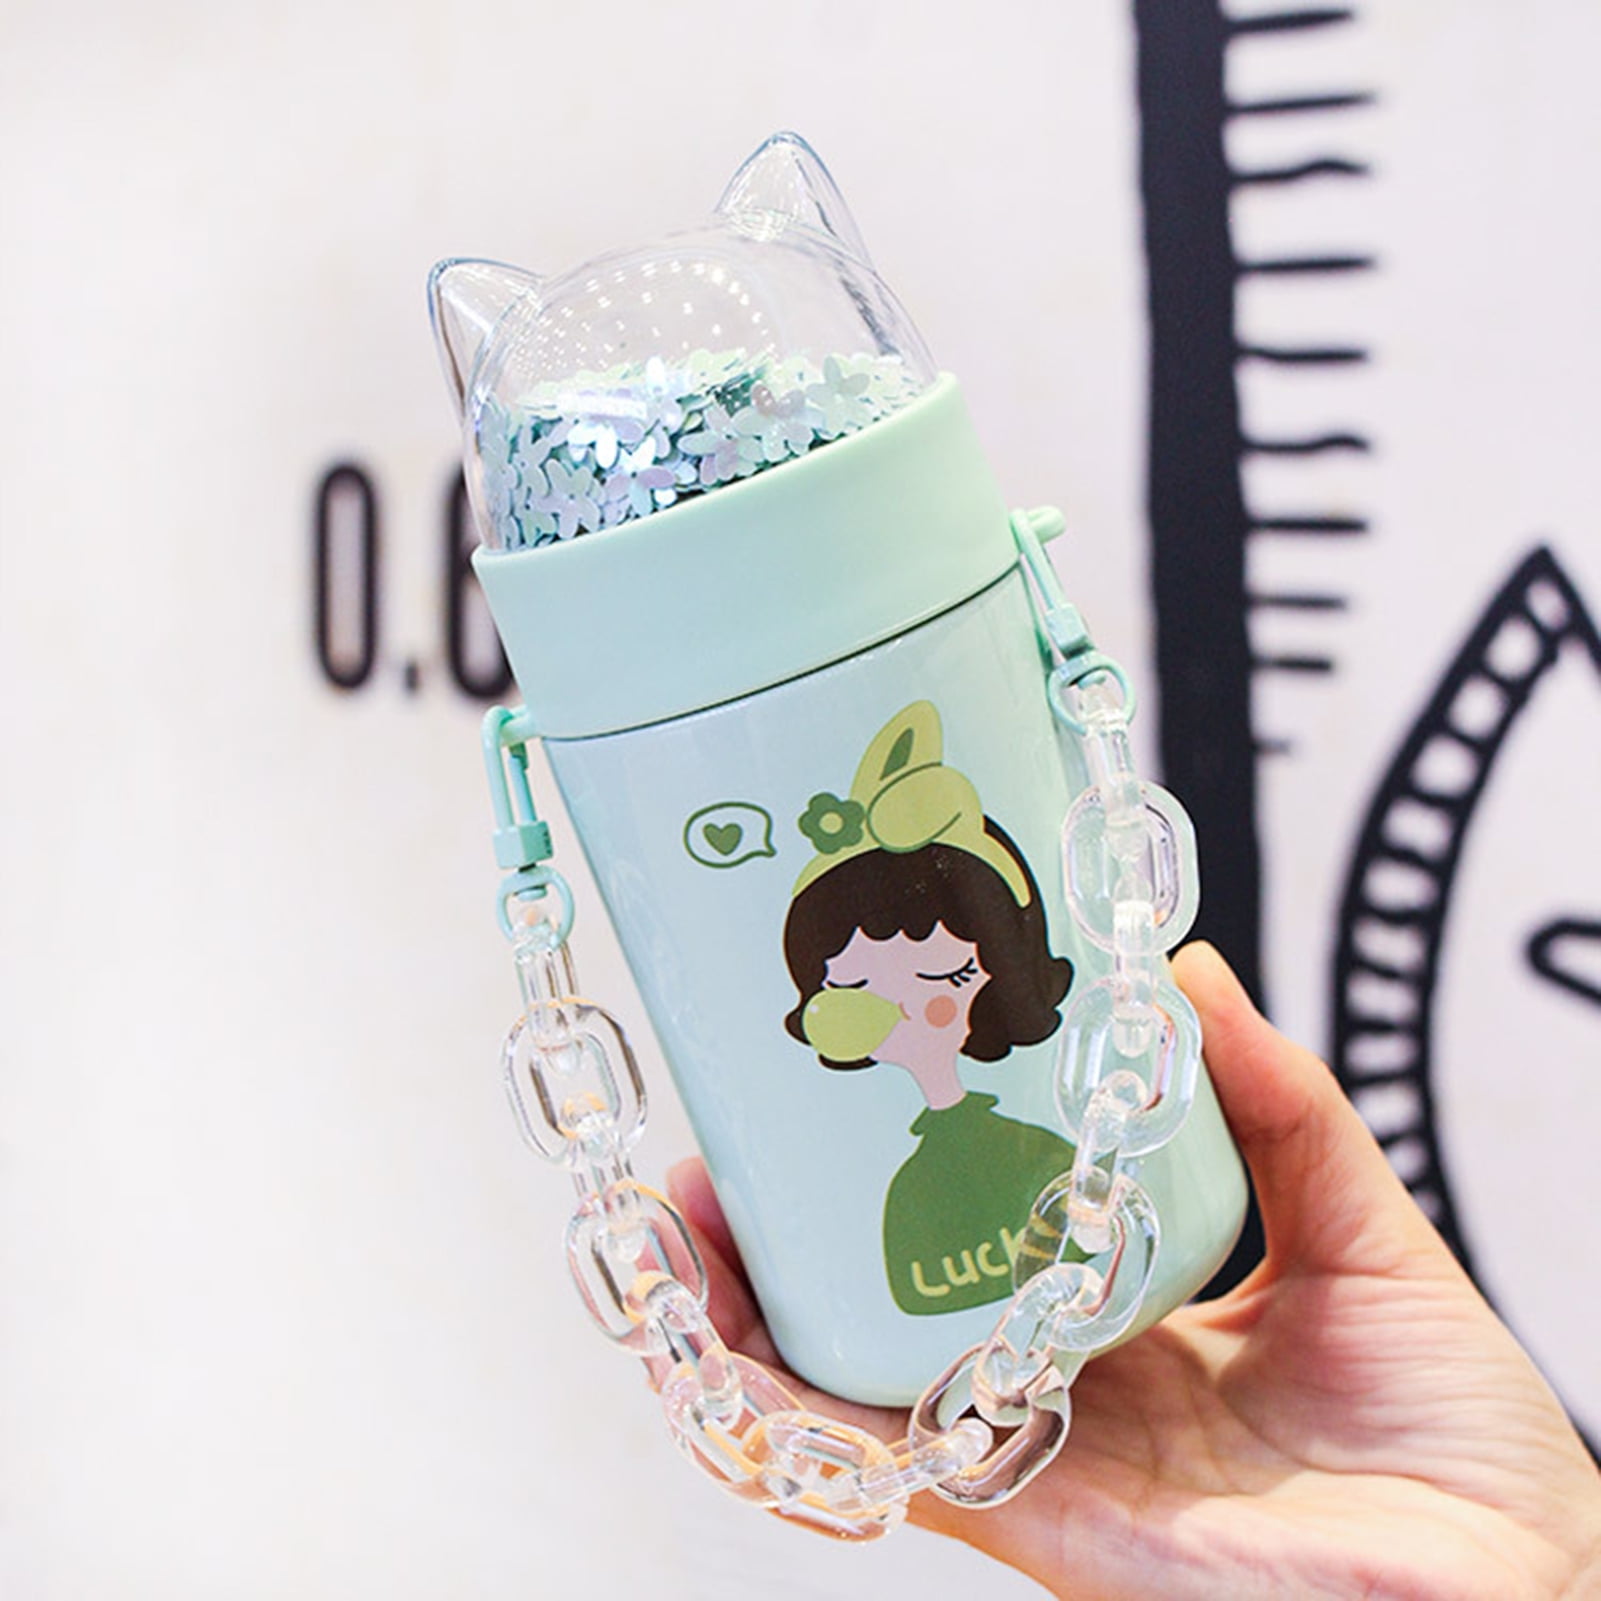 Girl Water Bottle for School Kid Sparkling Glitter Stainless Steel Thermos  with Sequins Lid Cystal Strap Cup Birthday Gift (girl green, 280 ml)